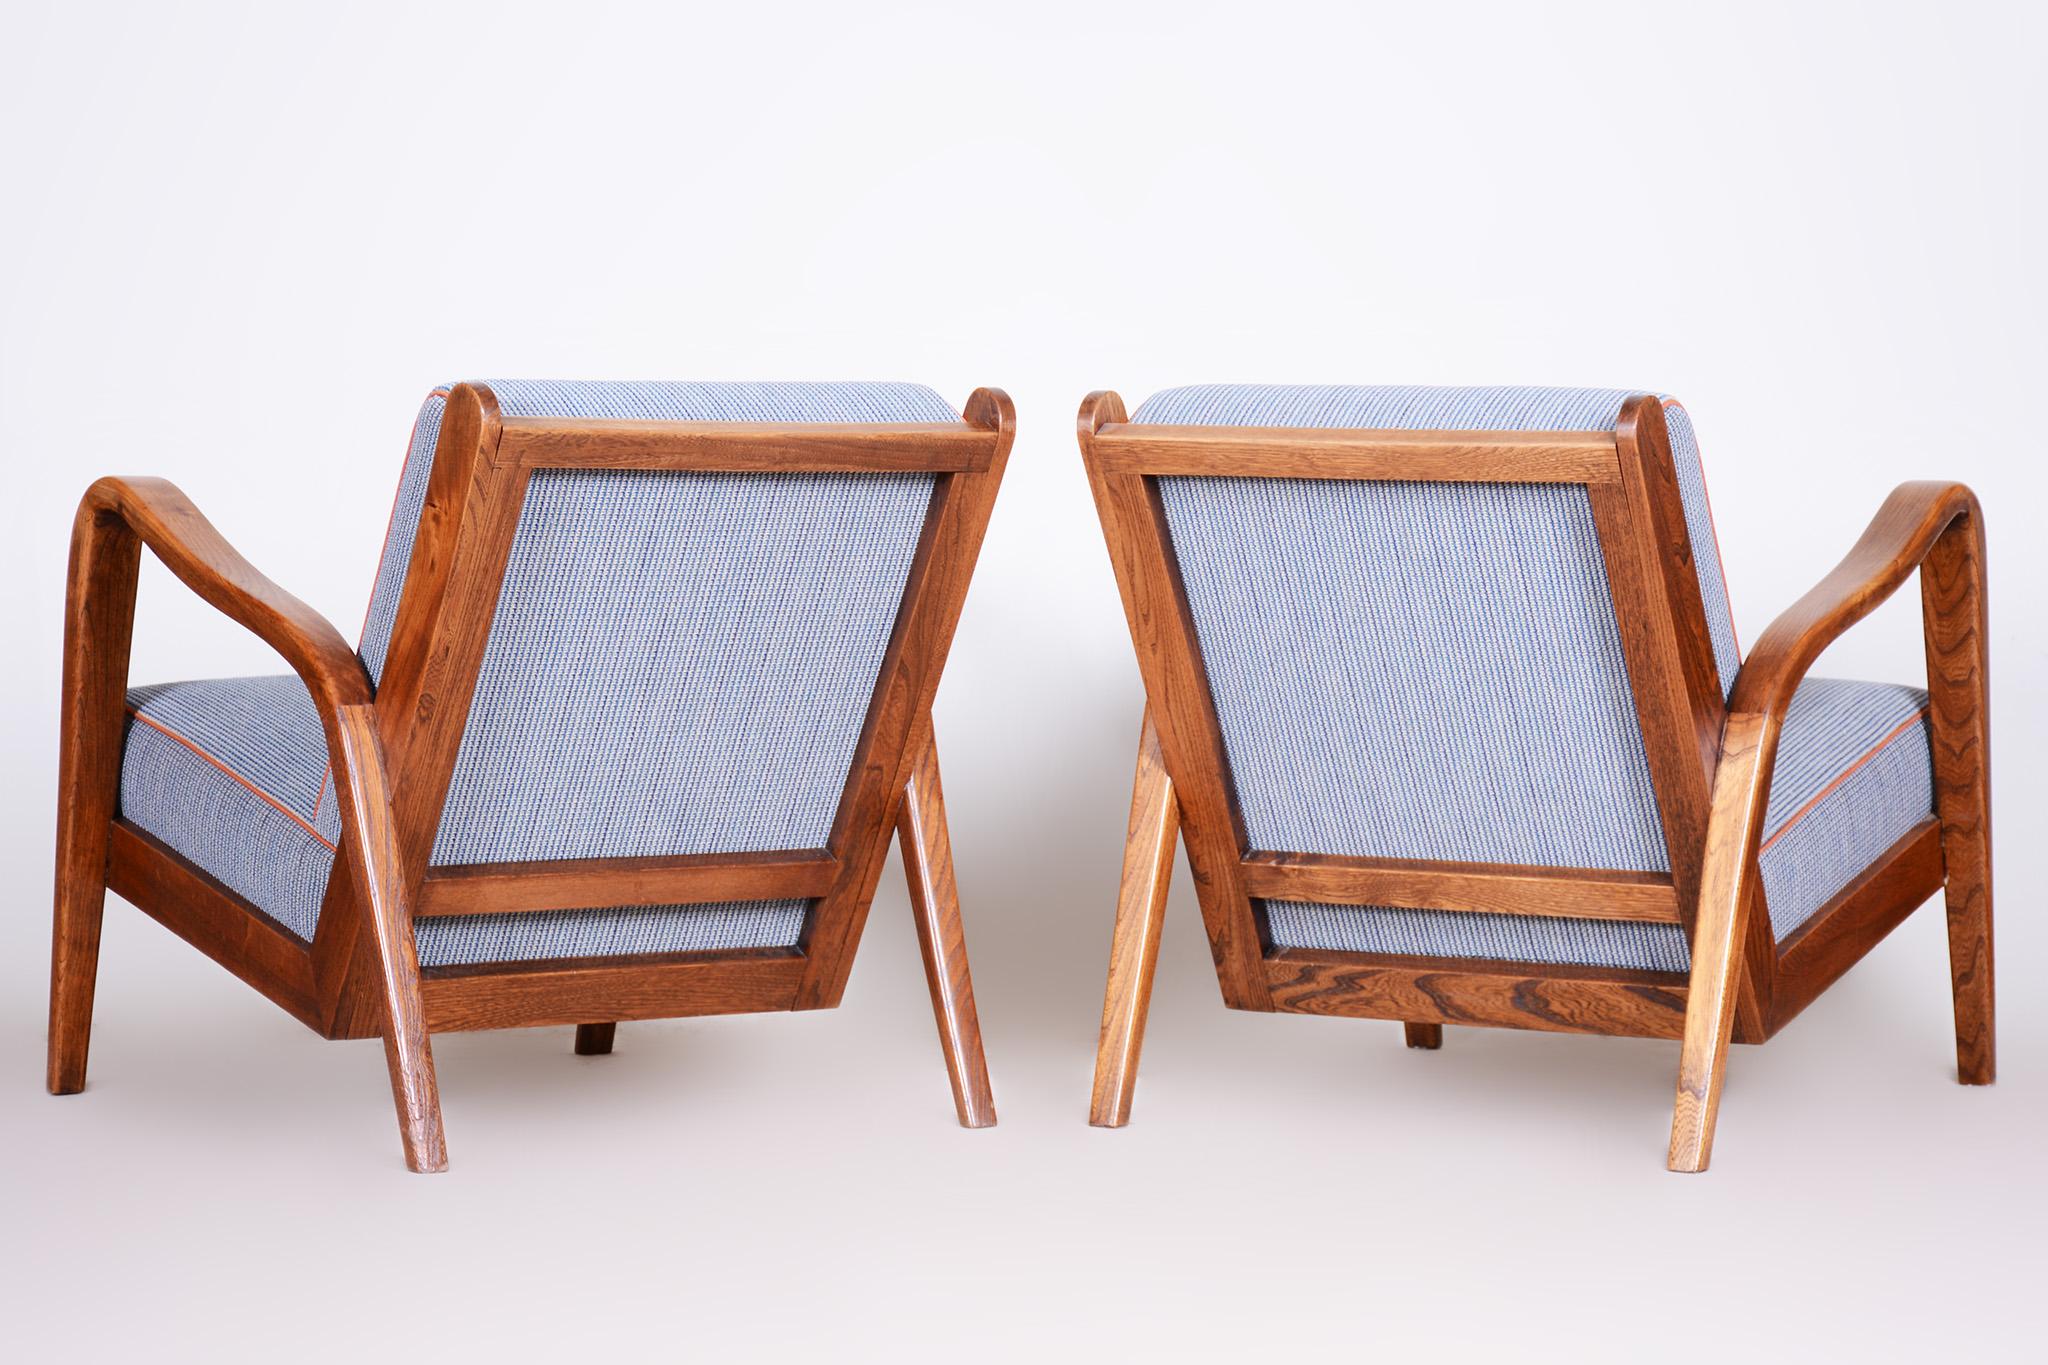 20th Century Ash Mid Century Armchairs Made in Czechia '40s, by Jan Vanek, Fully Restored